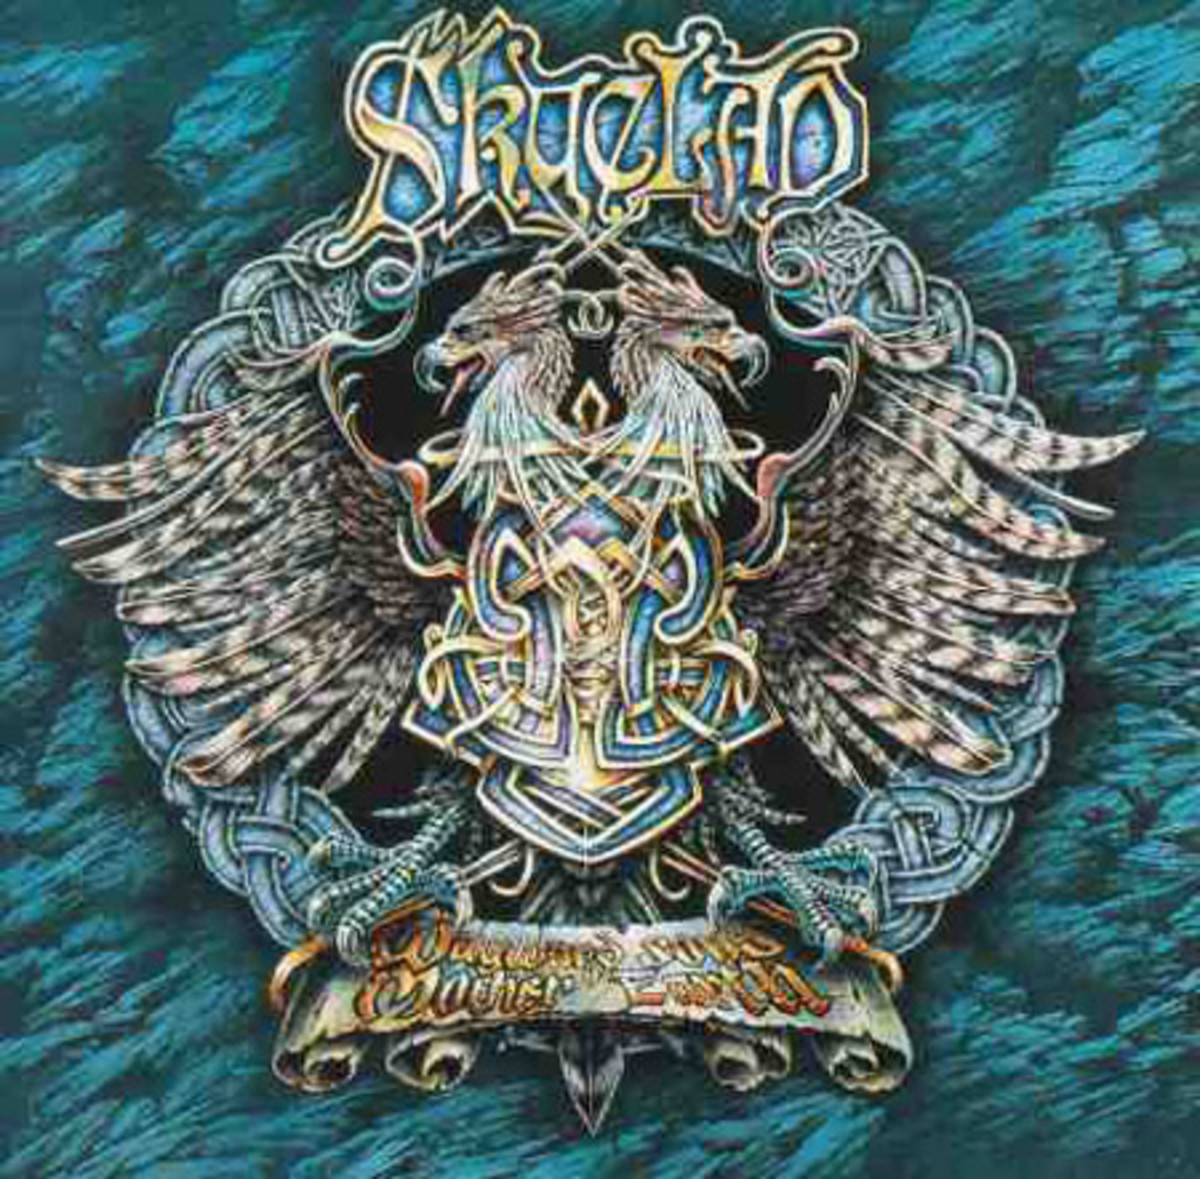 Skyclad’s Wayward Sons of Mother Earth – considered by many to be the first folk metal album